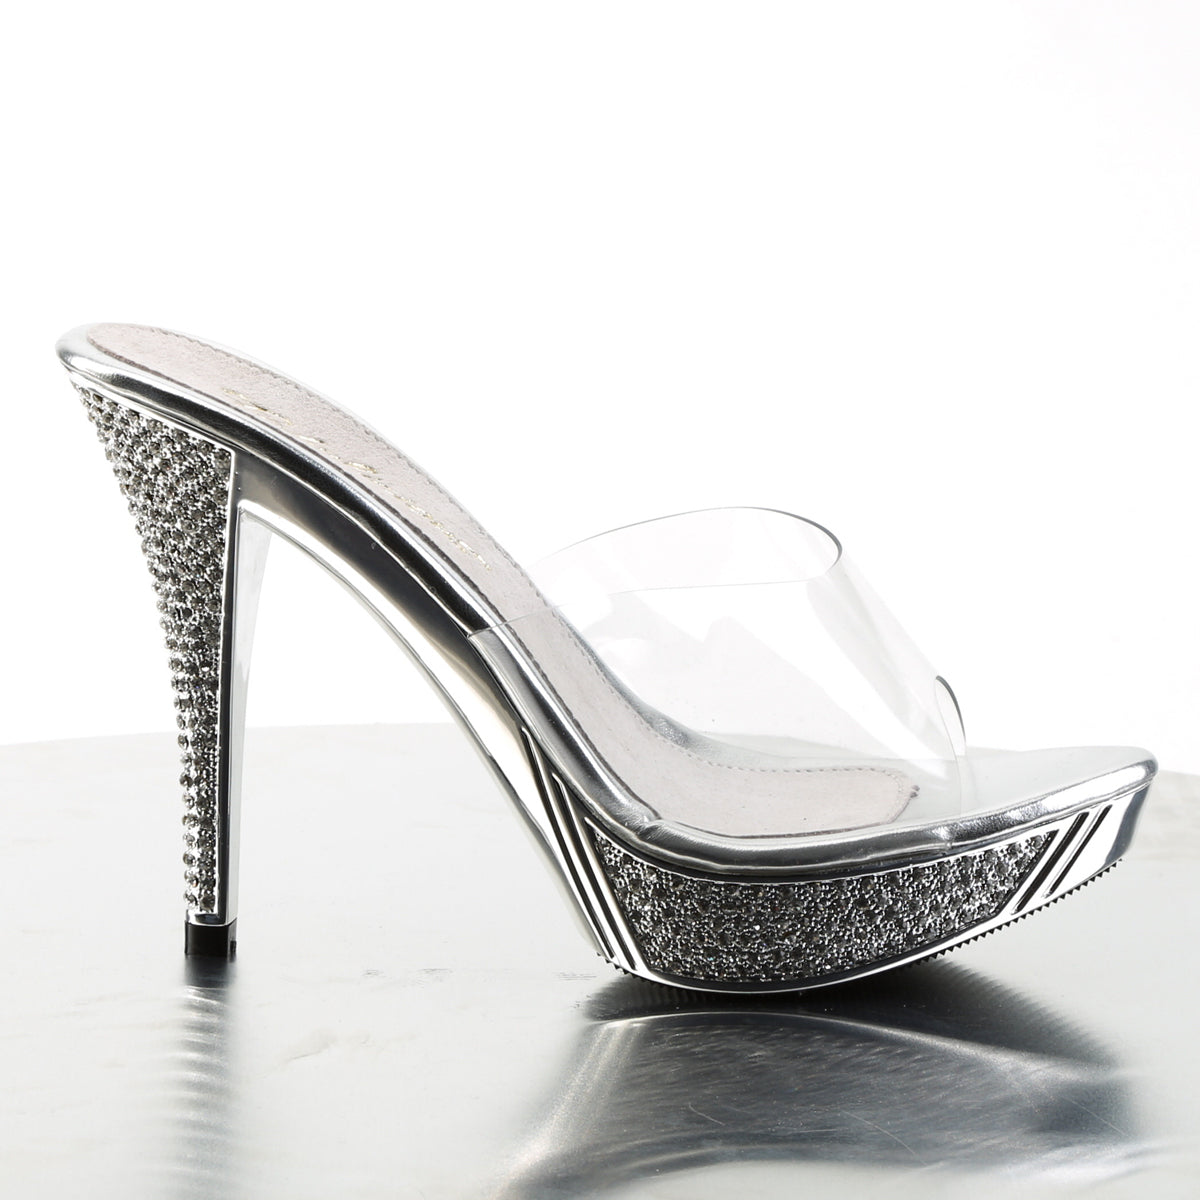 ELEGANT-401 Fabulicious Clear/Silver Chrome Shoes [Posing Heels]